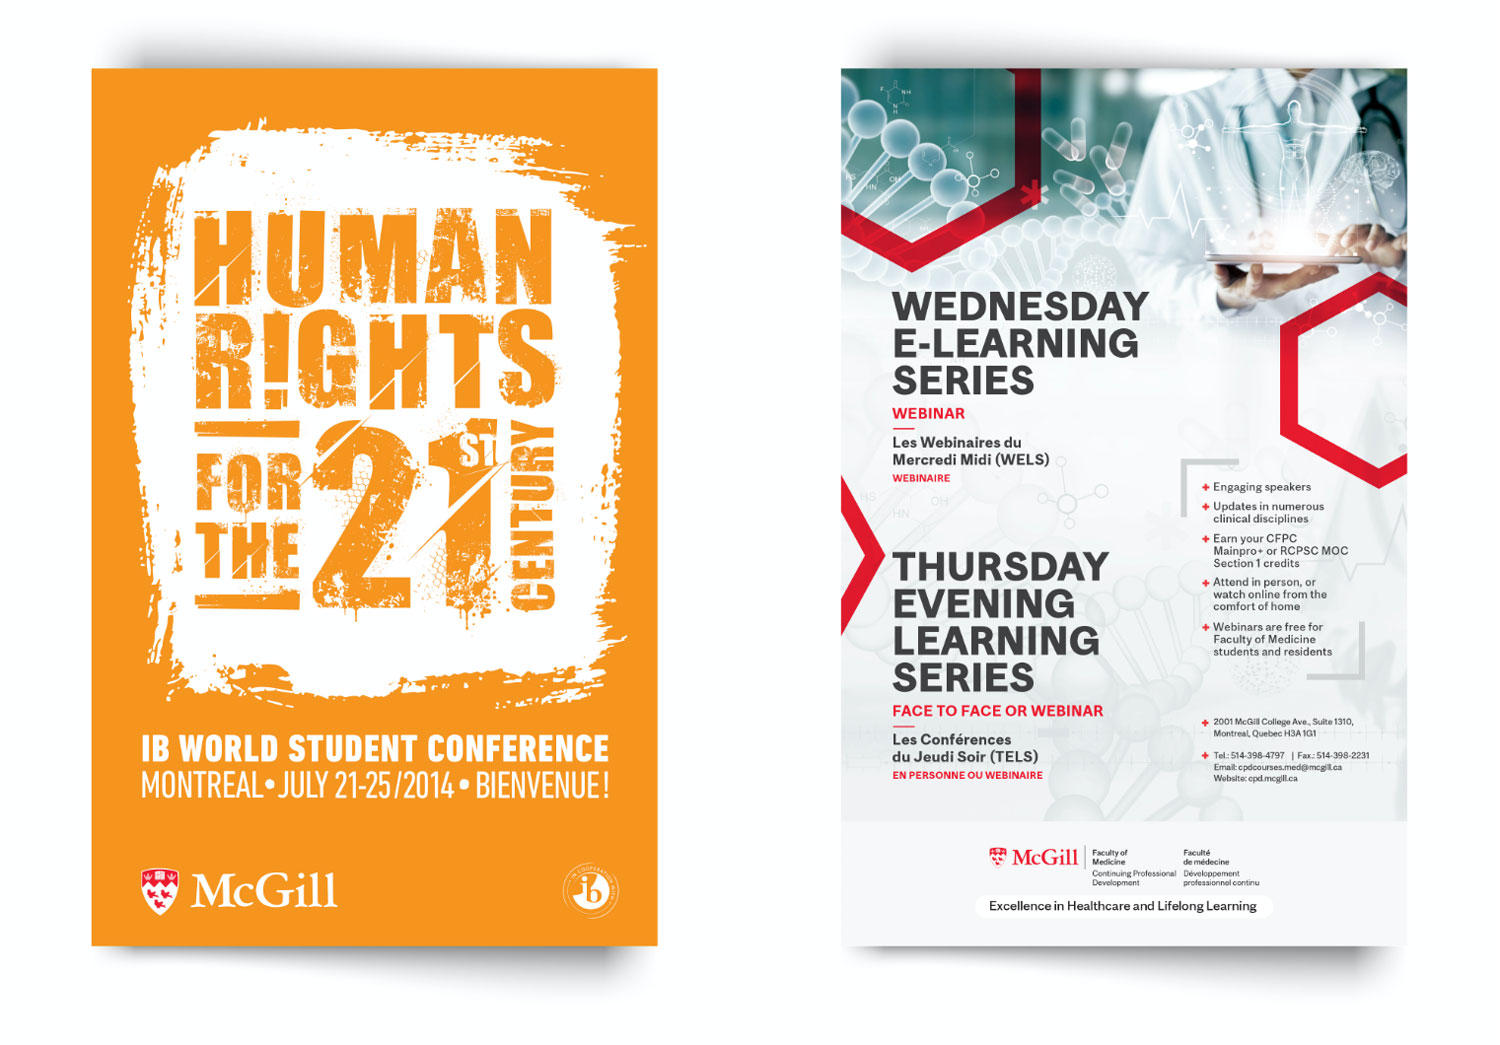 Human Rights Poster and Tels Wels Poster